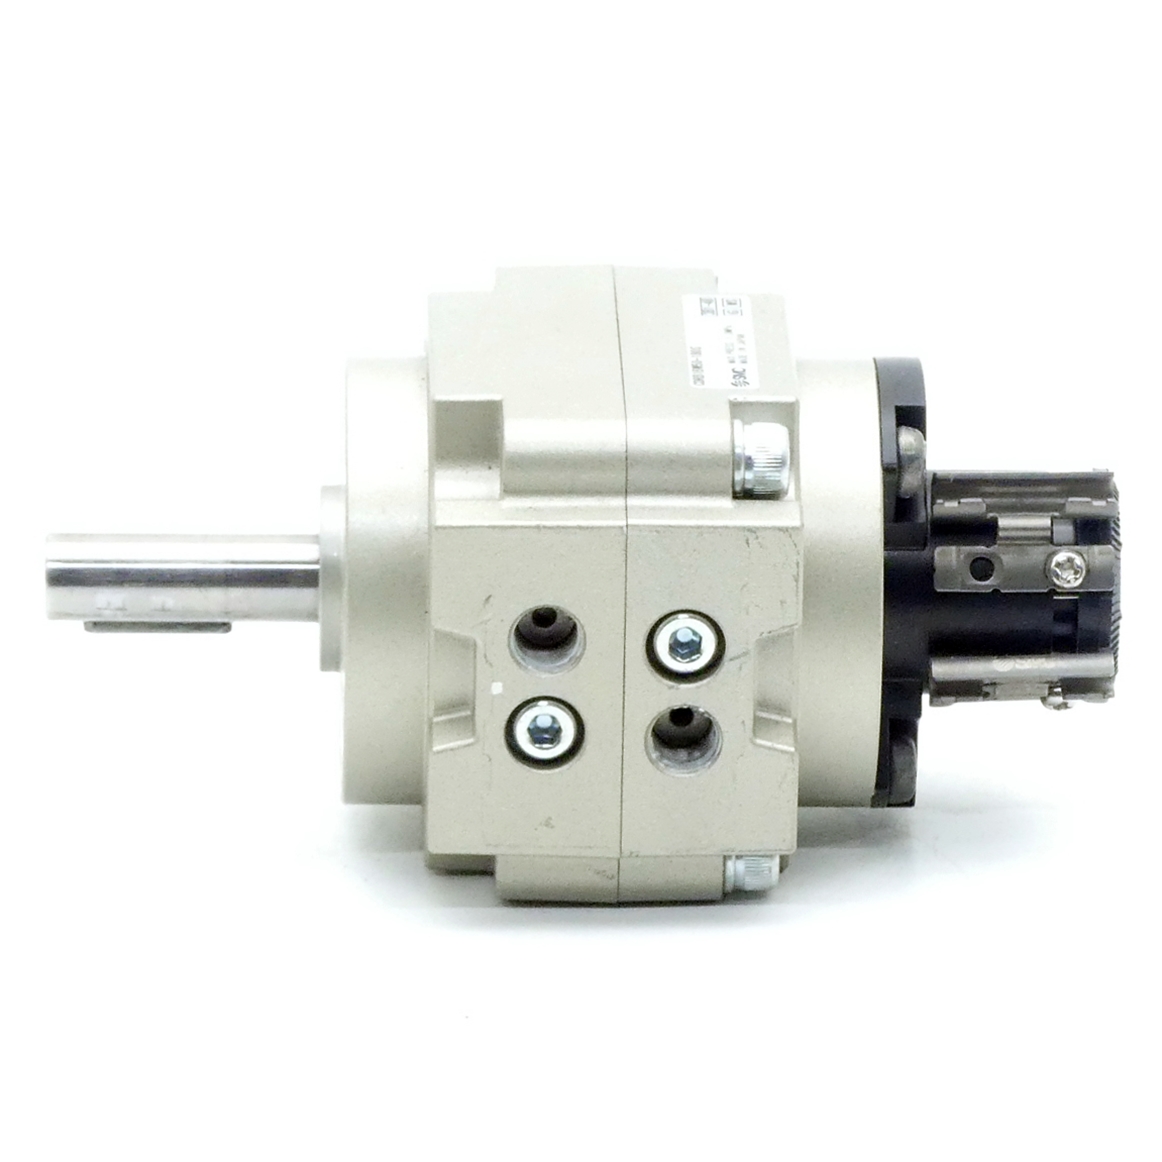 Part-turn actuator w. side-hung actuator CDRB1BW50-180S 